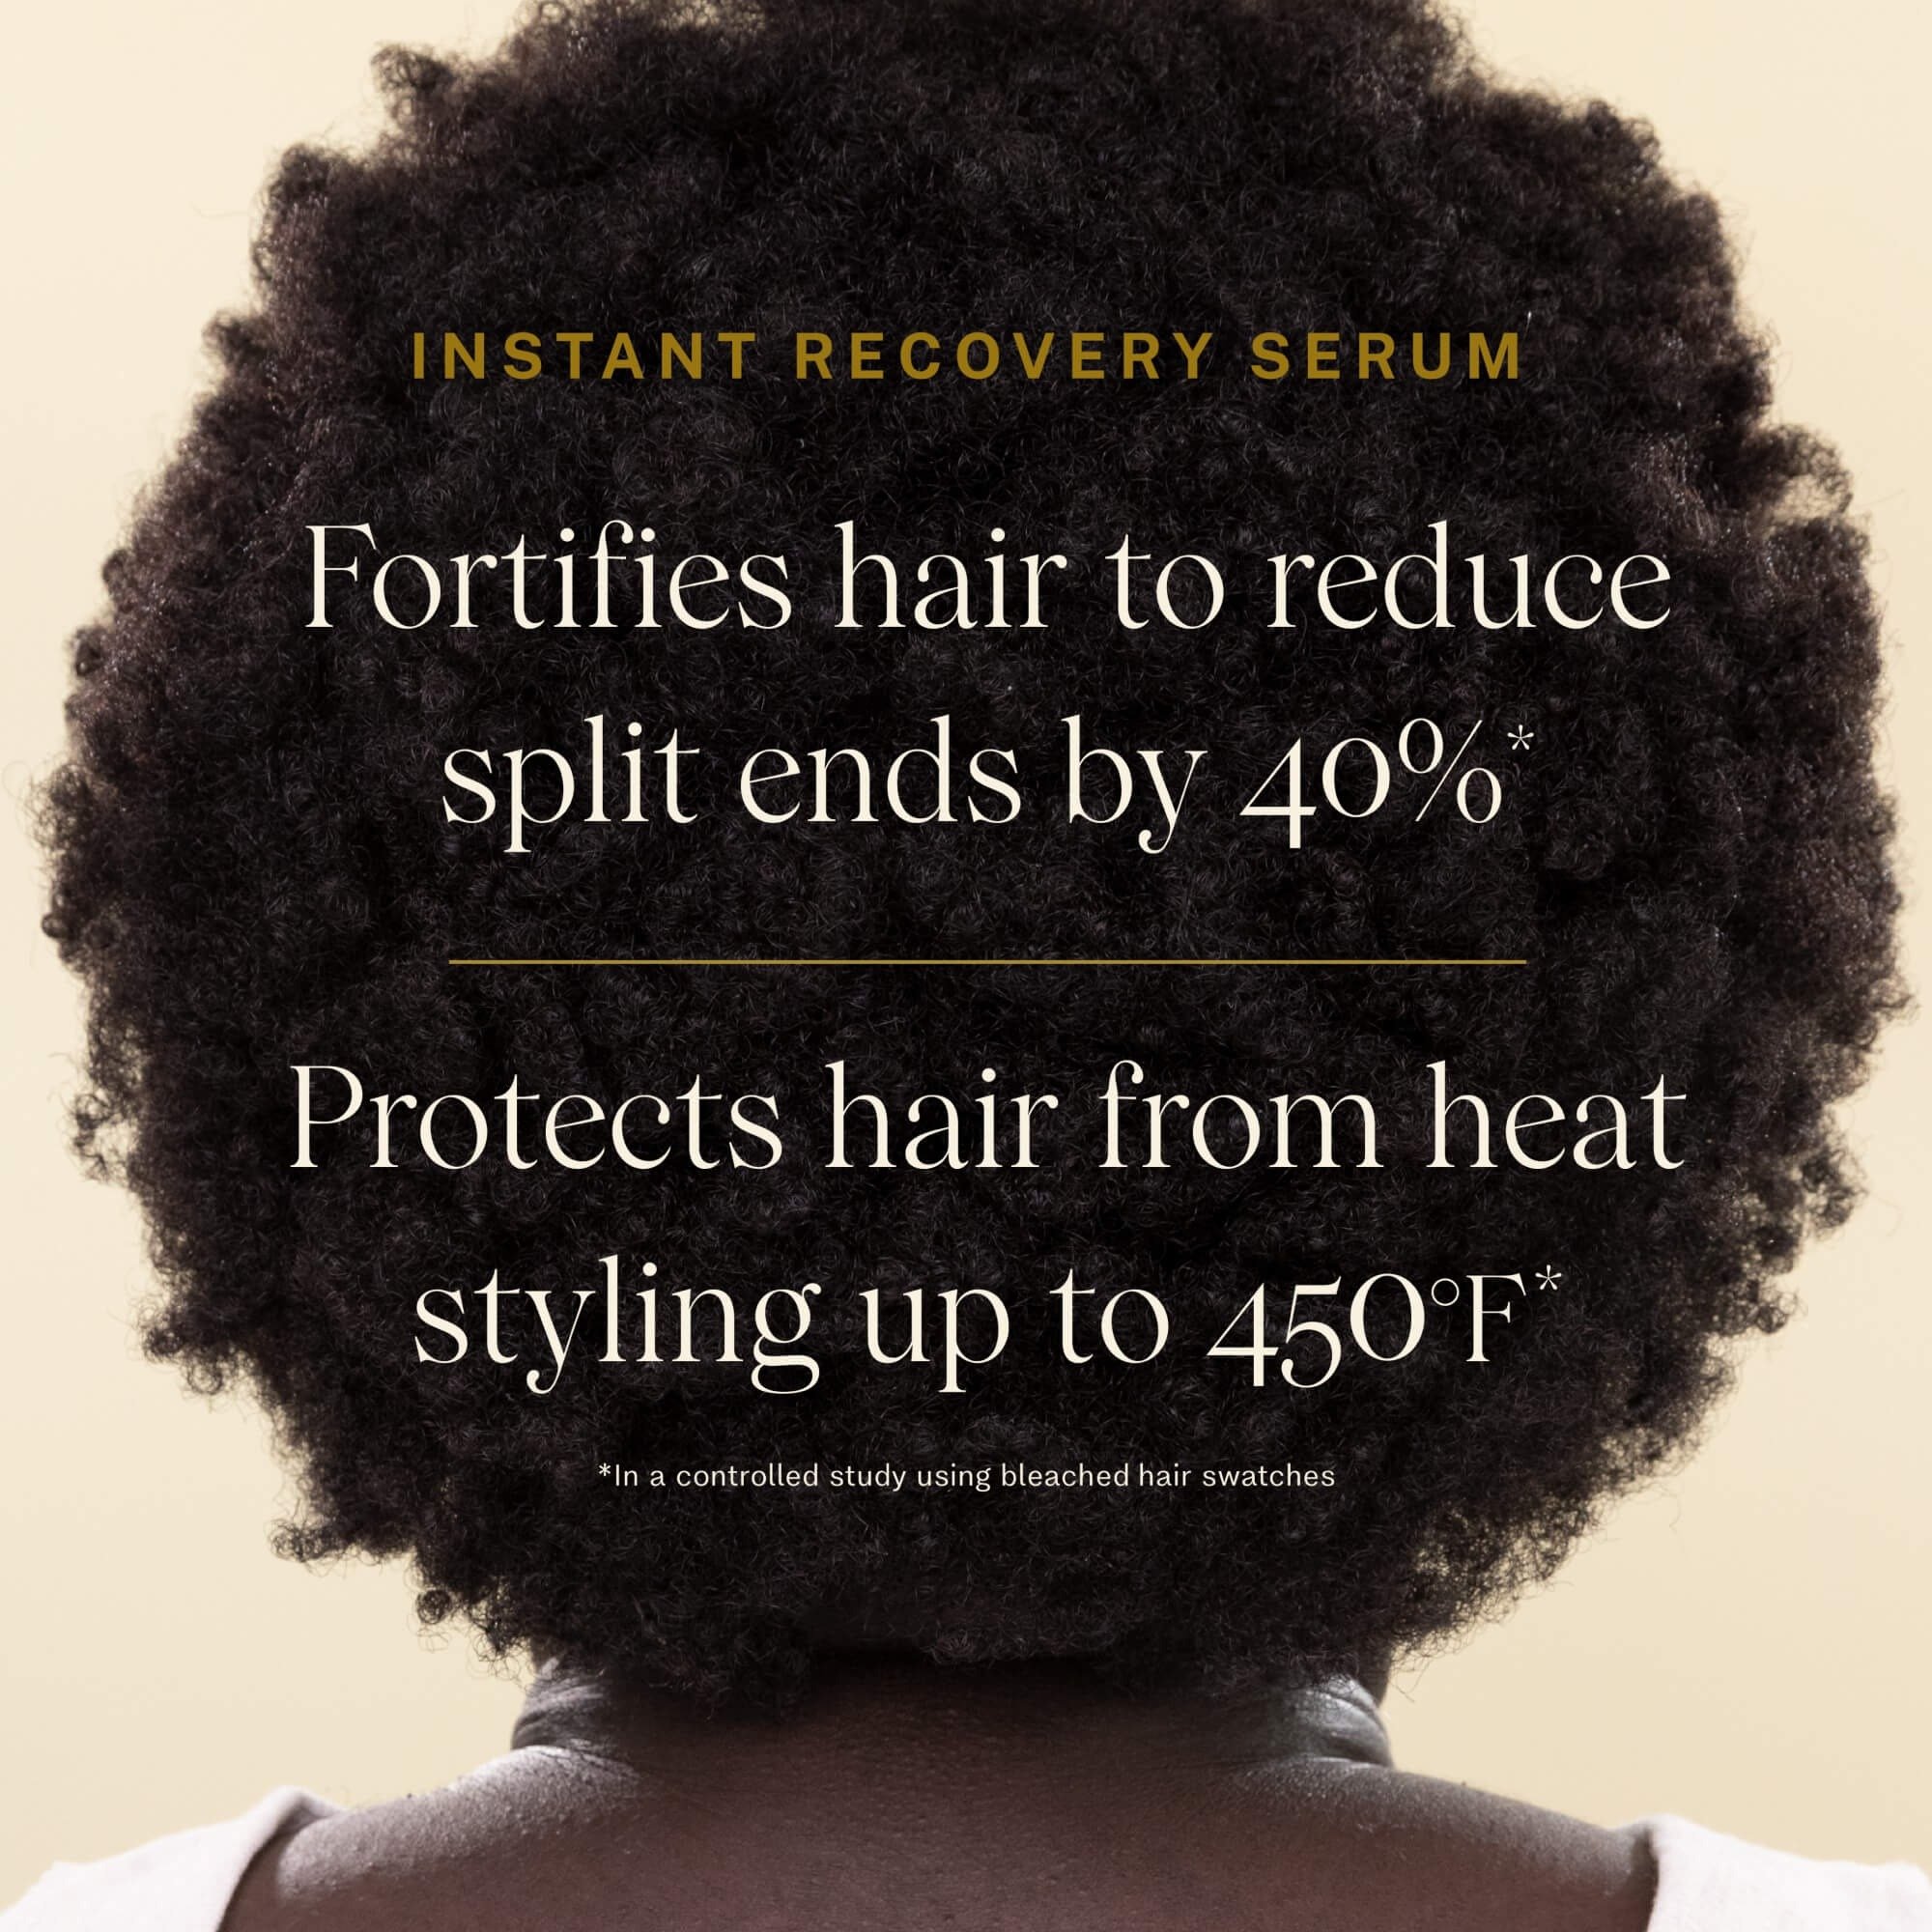 Instant Recovery Serum anti-frizz serum fortifies hair to reduce split ends by 40%; protects hair from heat styling up to 450 degrees farenheit.